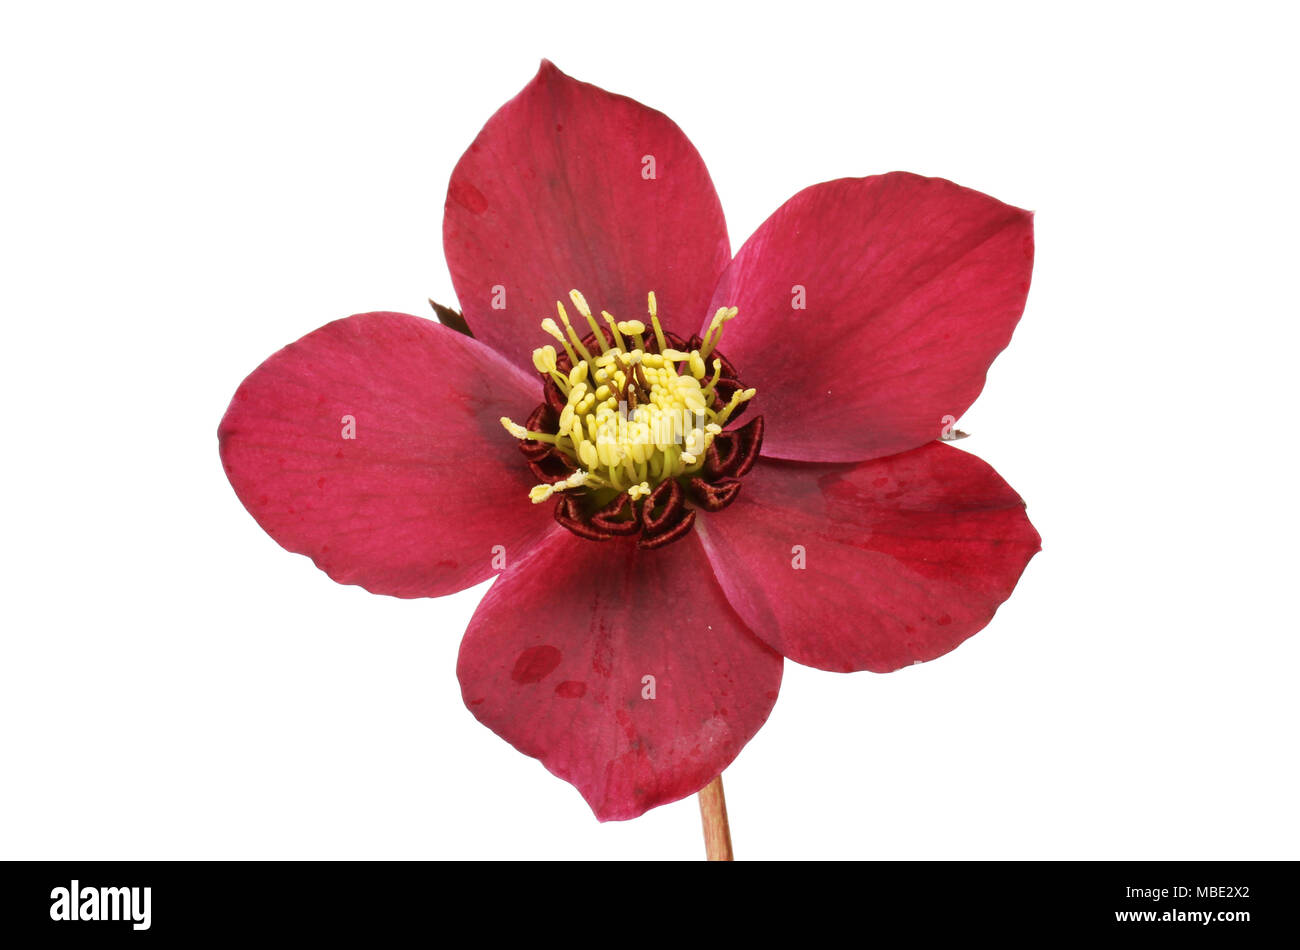 Closeup of a dusky red hellebore flower isolated against white Stock Photo